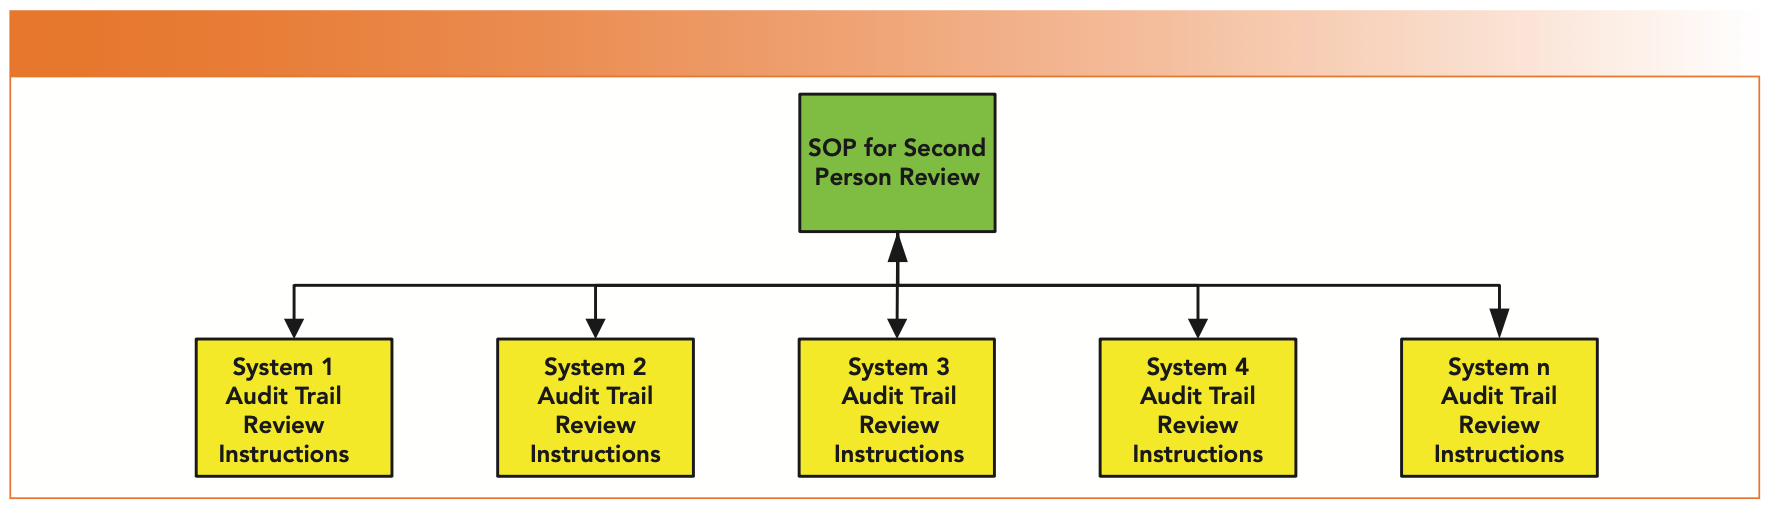 FIGURE 2: Procedure for second person review with linked specific work instructions for individual system audit trail review.